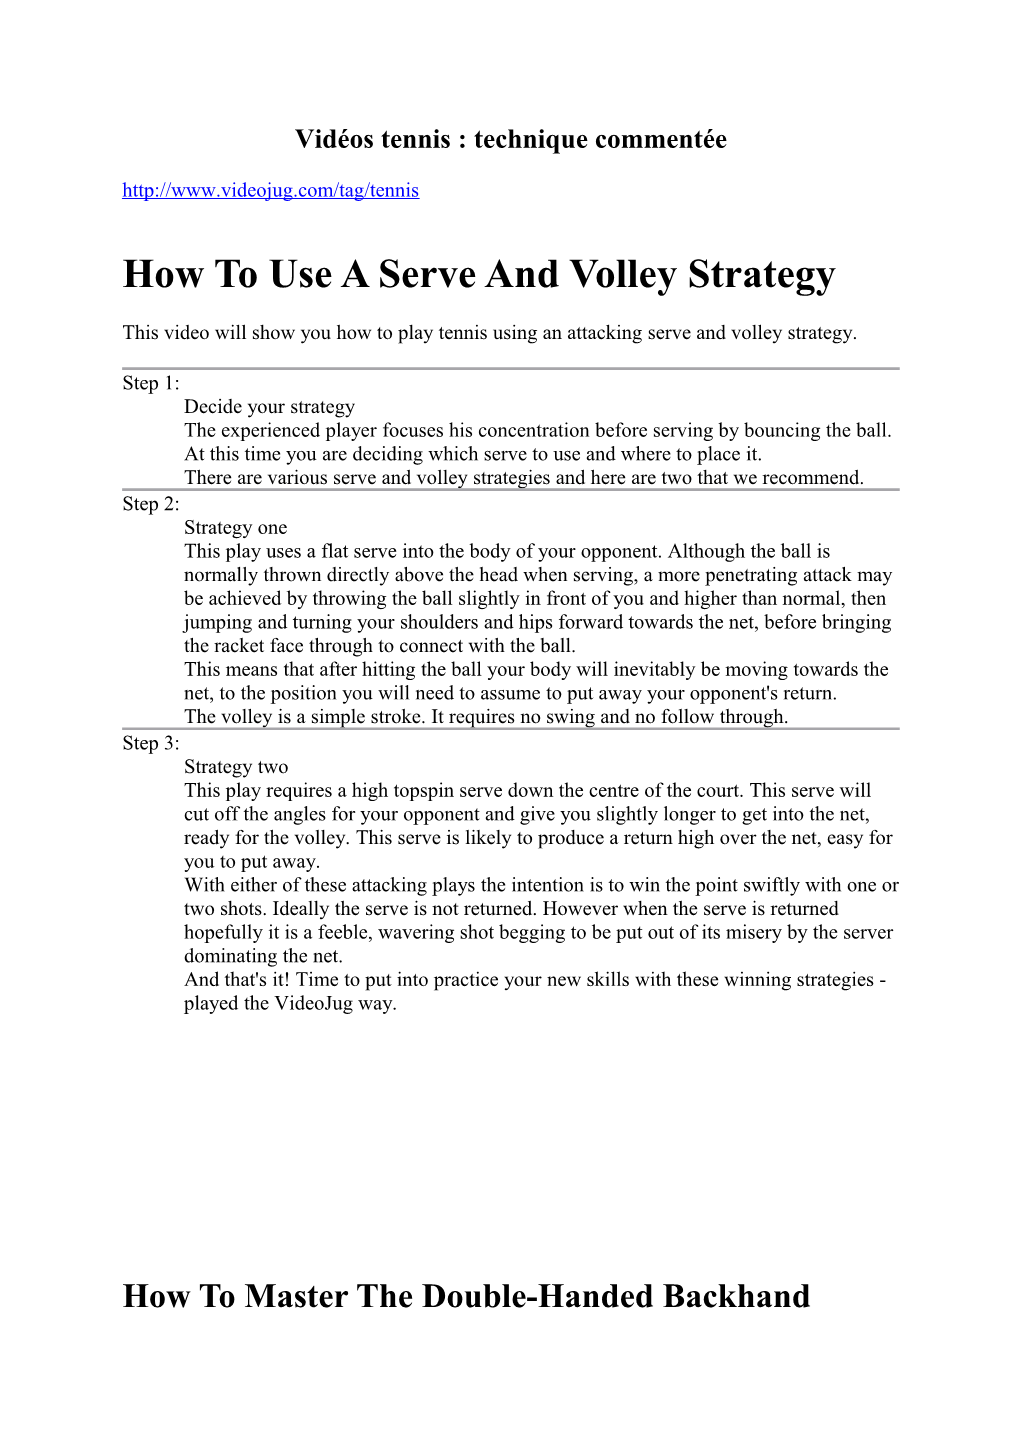 How to Use a Serve and Volley Strategy